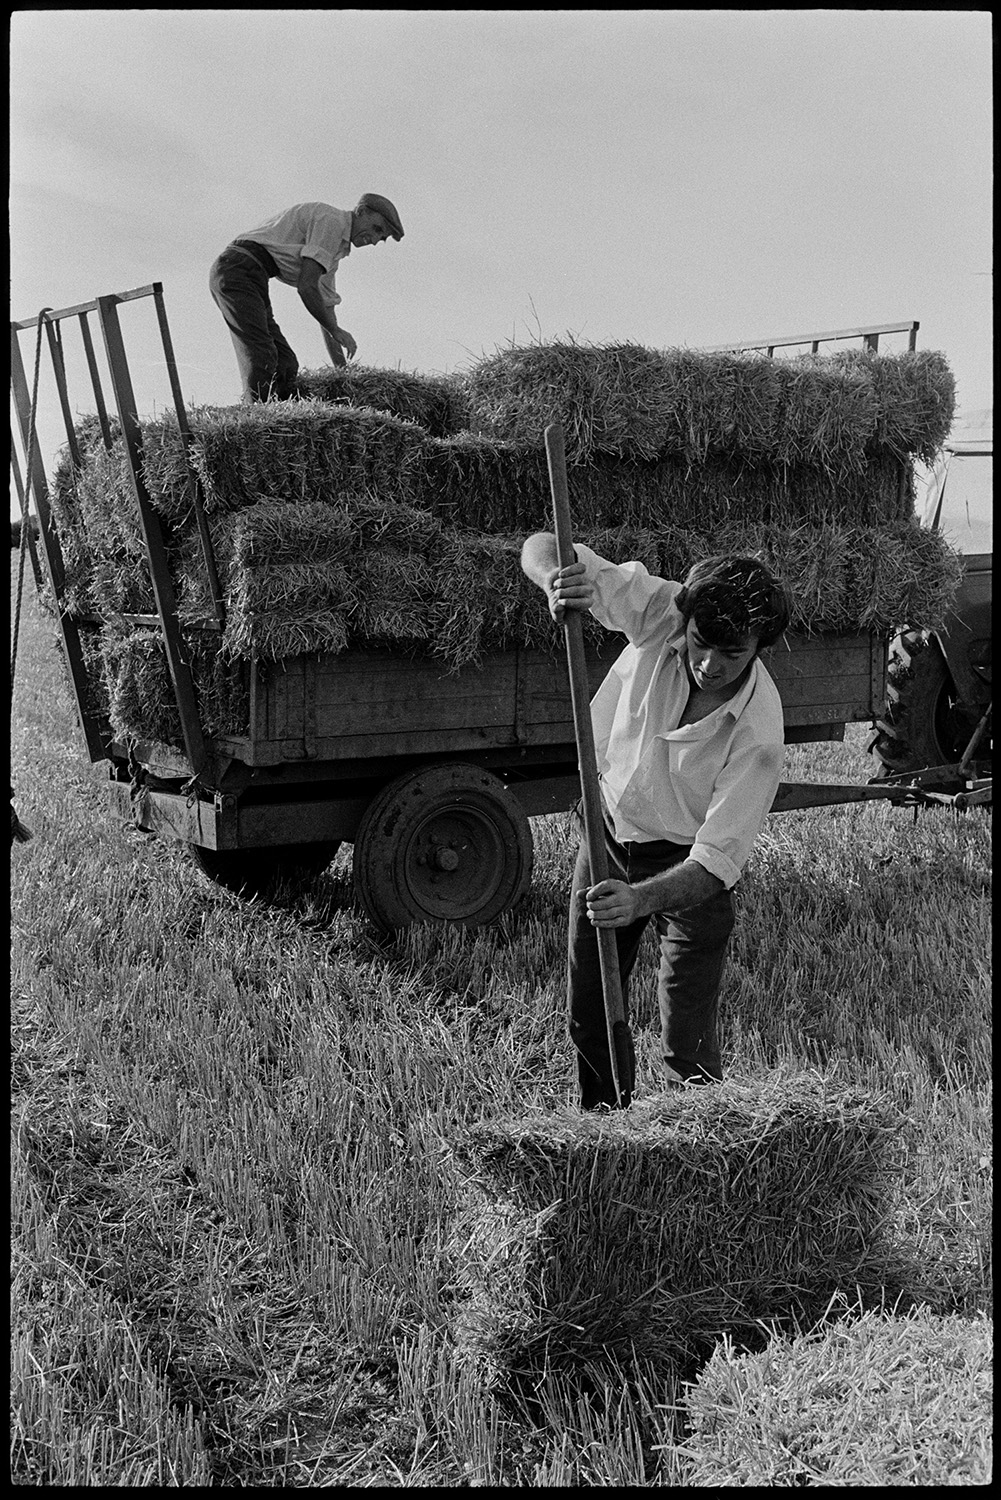 Two members of the Ward family loading straw bales onto a trailer in a field at Nethercott, Iddesleigh, using a pitchfork.